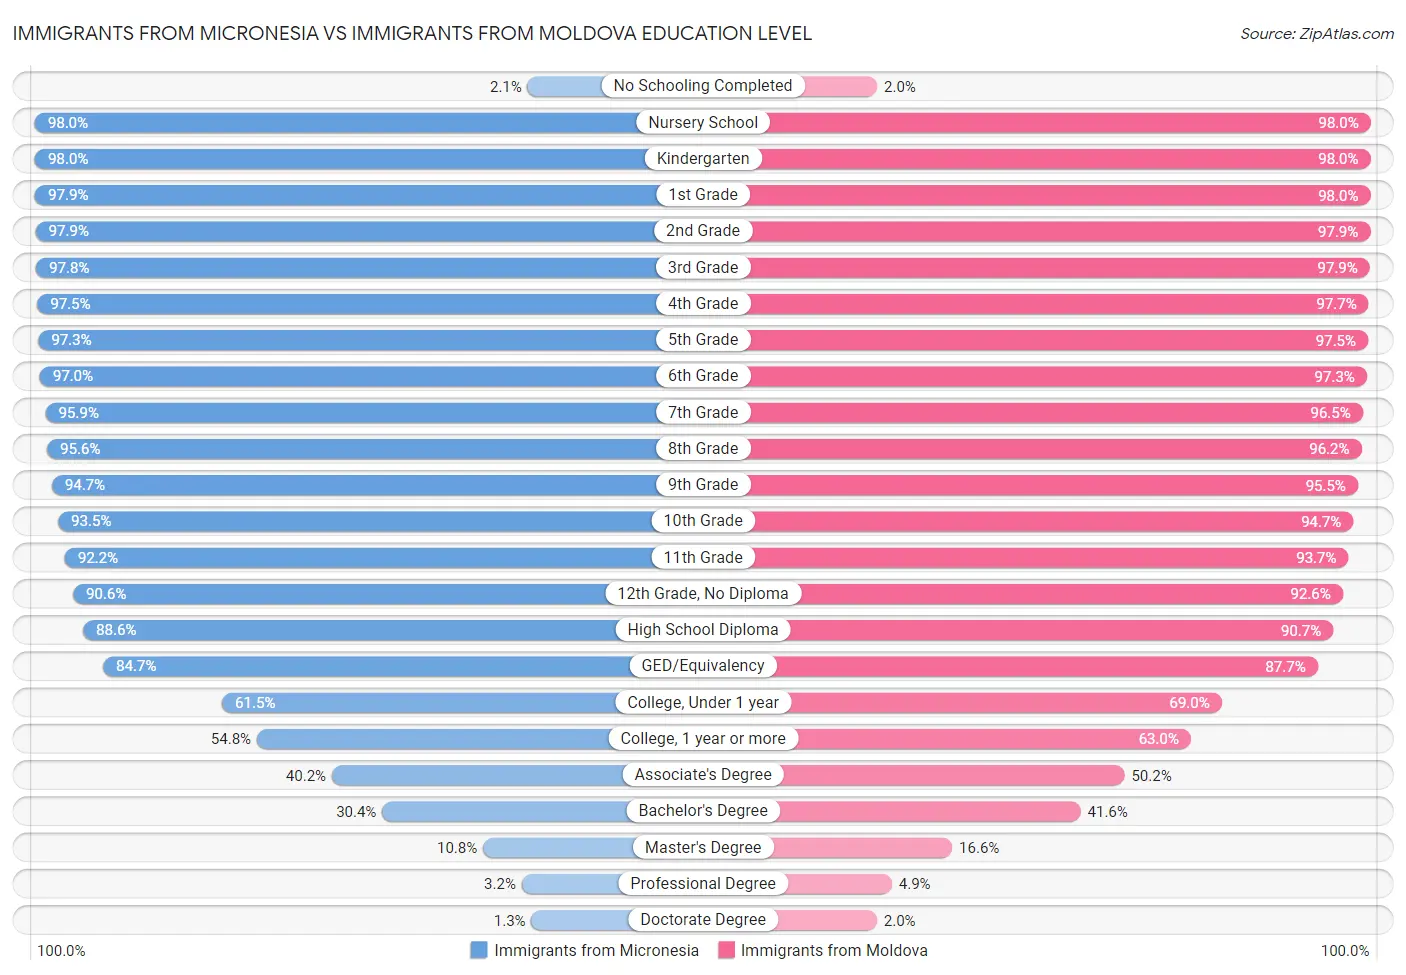 Immigrants from Micronesia vs Immigrants from Moldova Education Level